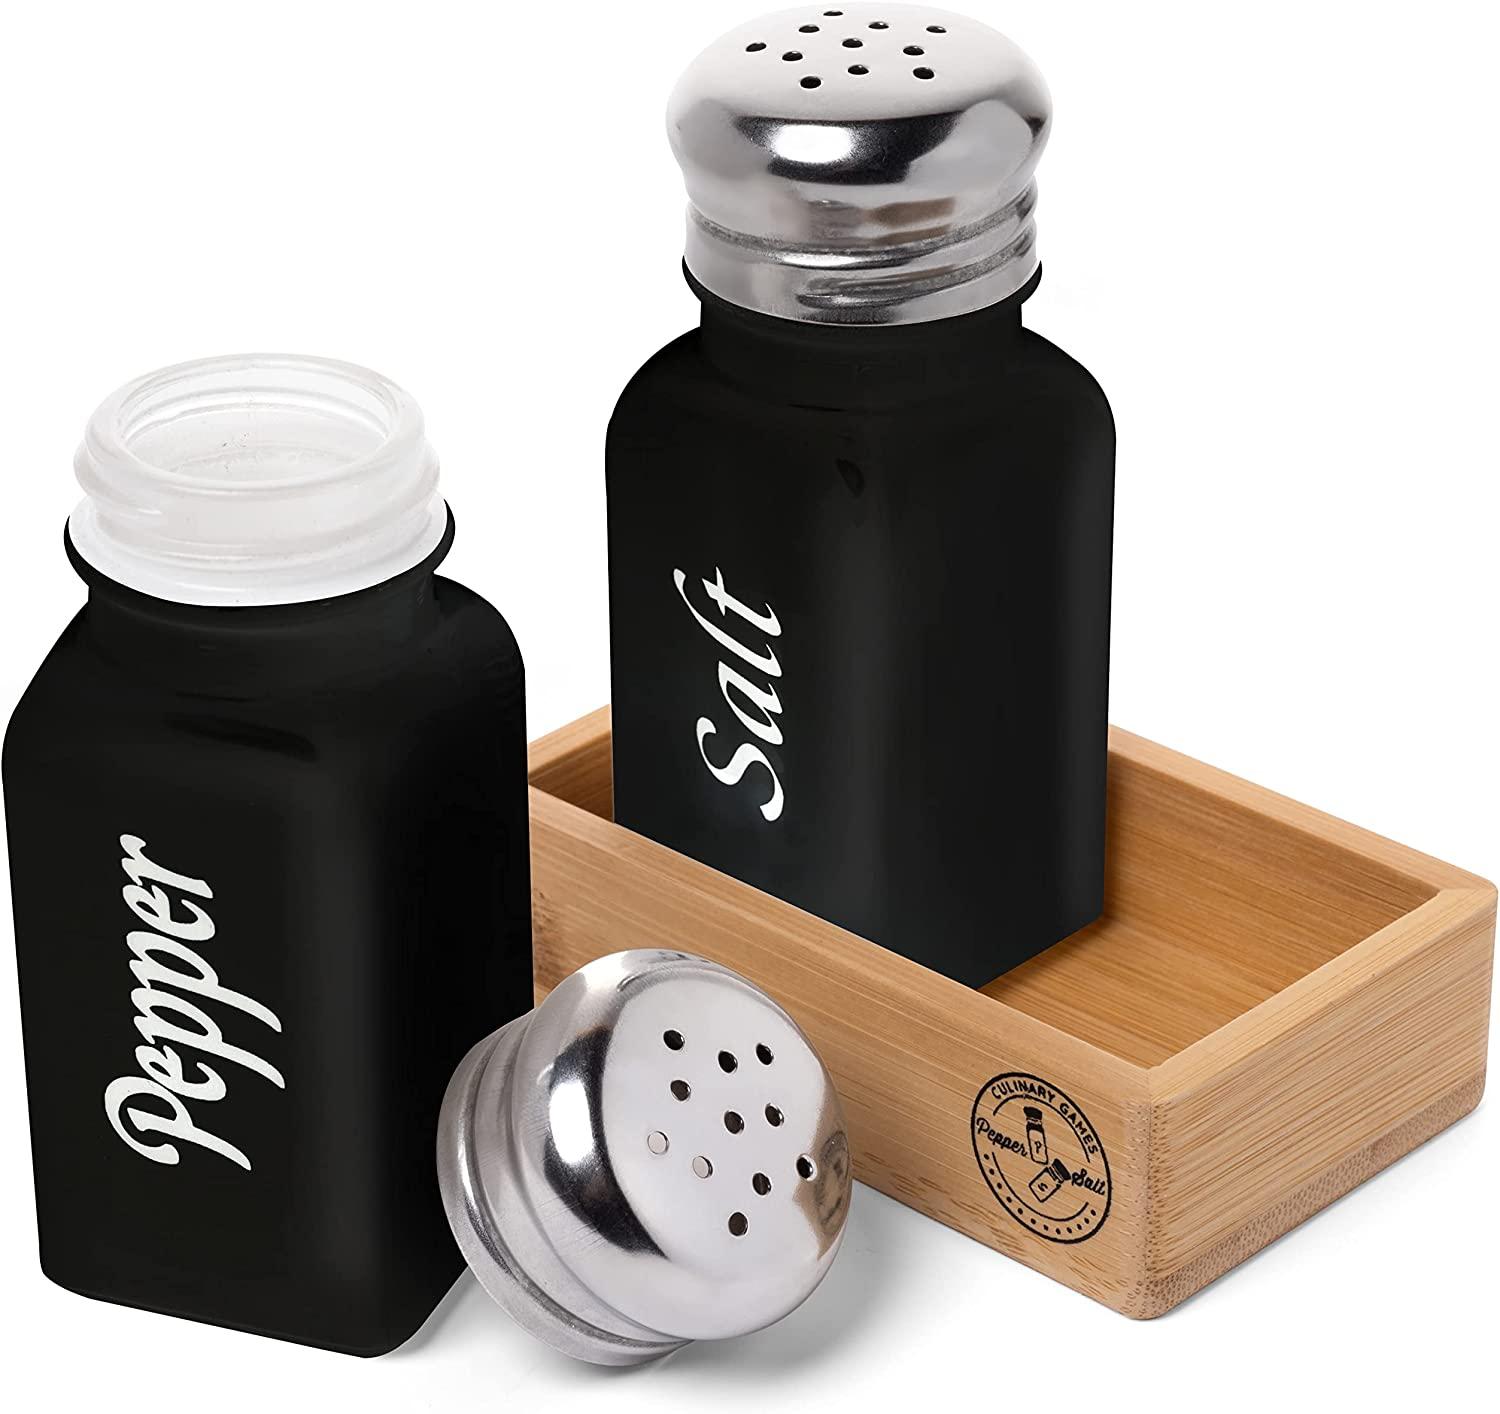  Black Salt and Pepper Shakers Set, 5 oz Glass Bottom Salt Shaker  for Kitchen Table, for Black Kitchen Decor and Accessories, Easy to Clean &  Refill: Home & Kitchen